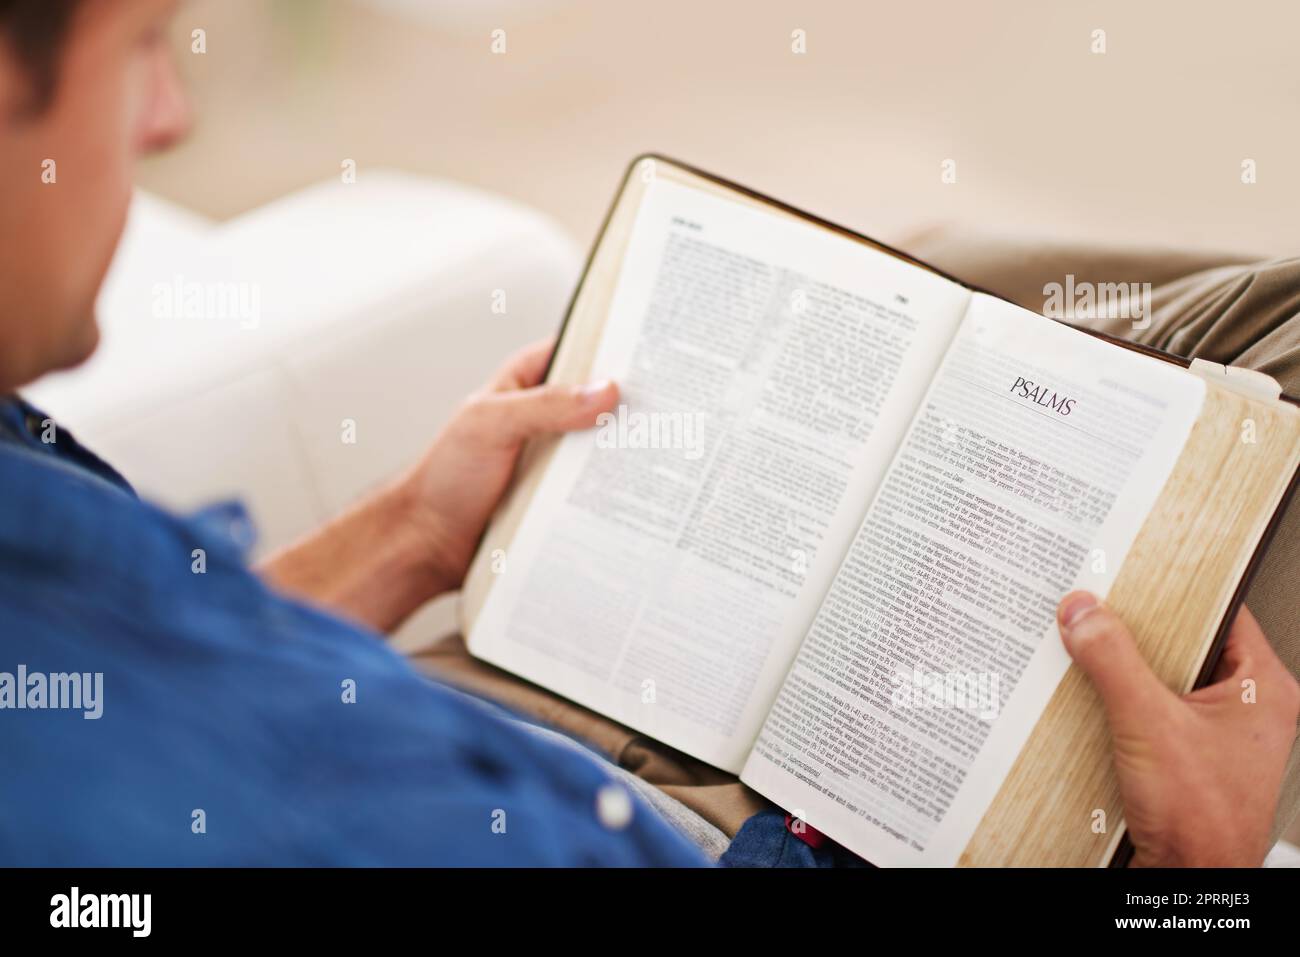 Reading through the psalms. a man reading the Bible at home. Stock Photo